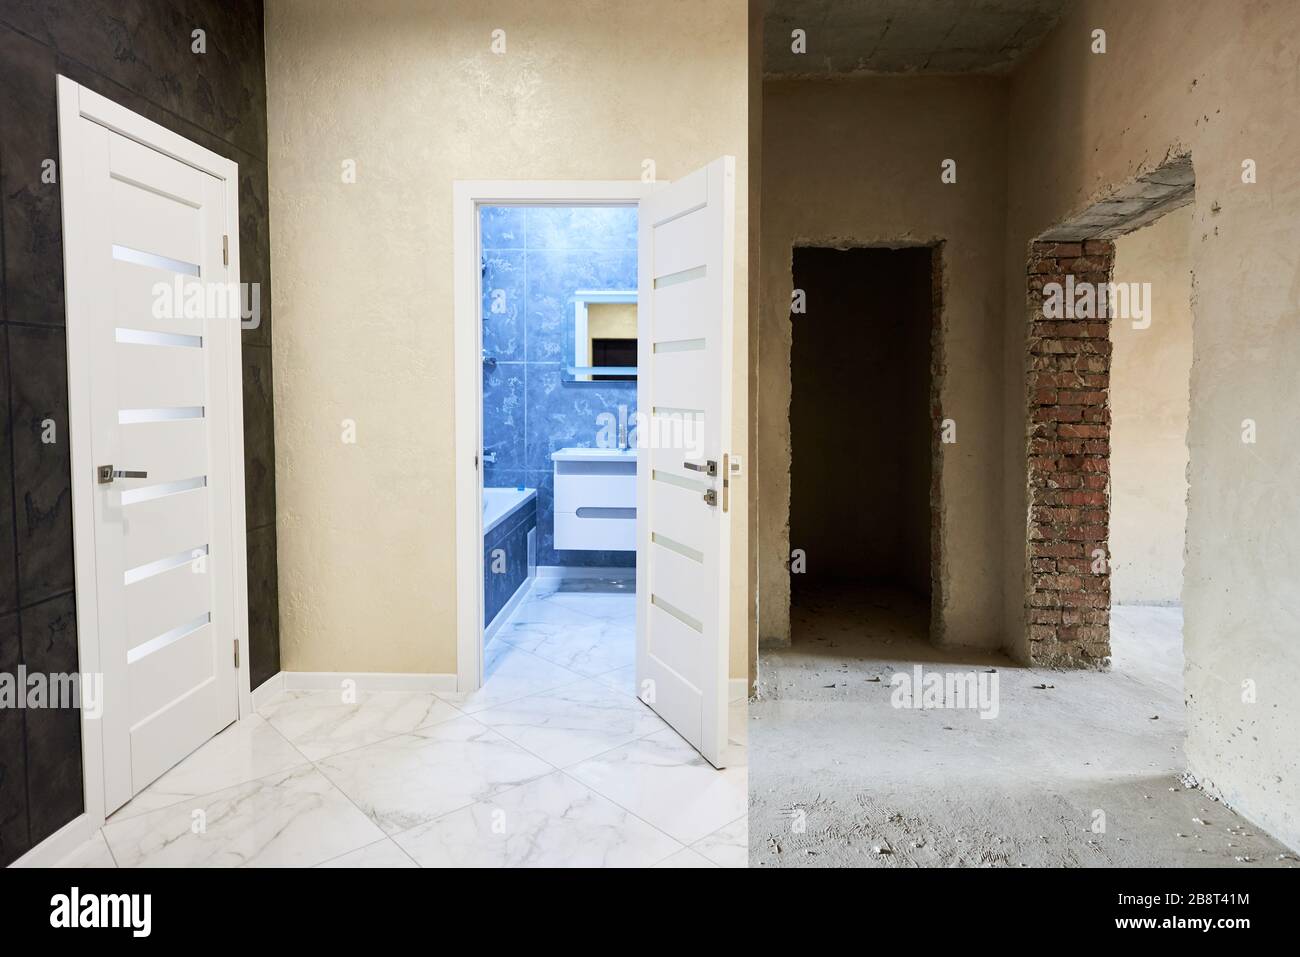 Comparison of a room in an apartment before and after renovation, empty grey walls, floor, doorways vs new tiled room with white doors, view to a blue furnished bathroom Stock Photo